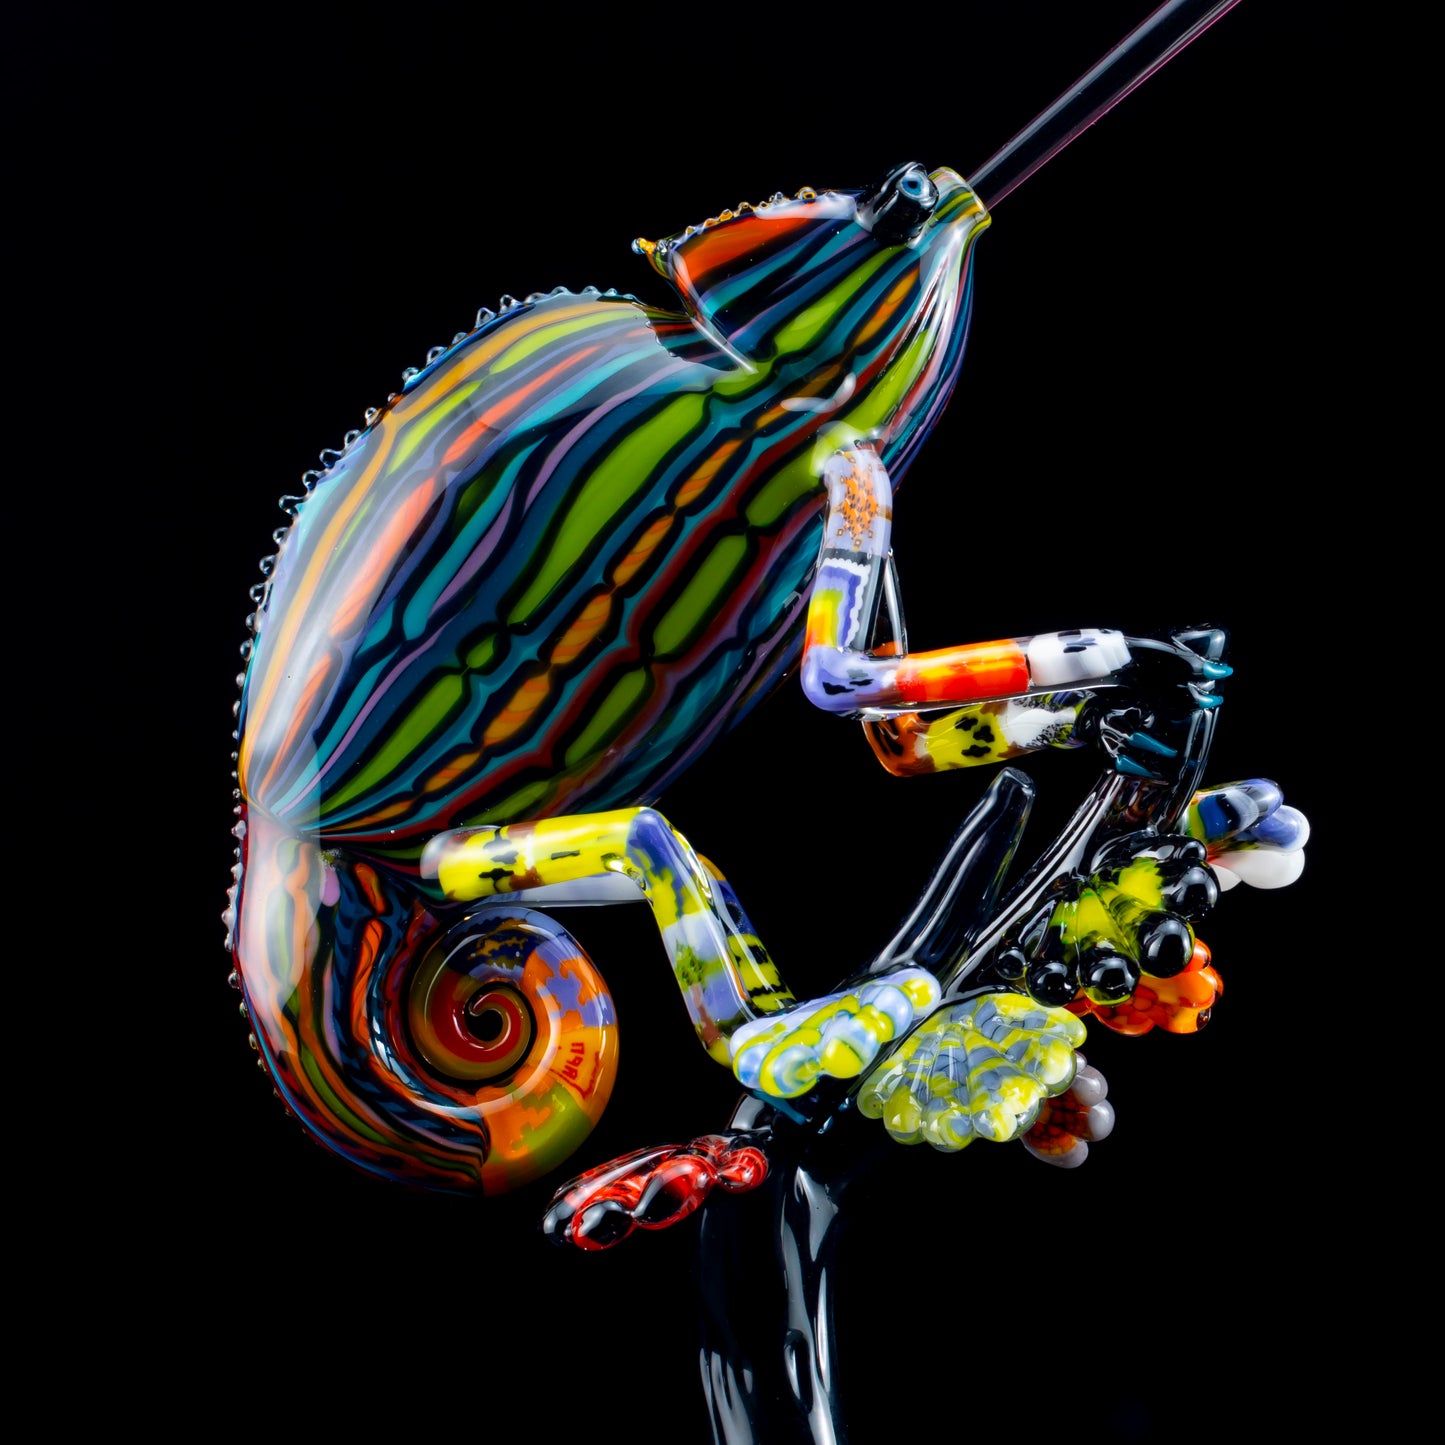 “Jacky The Chameleon” Rig by Crunklestein x Trip A (Coogi Zoo)